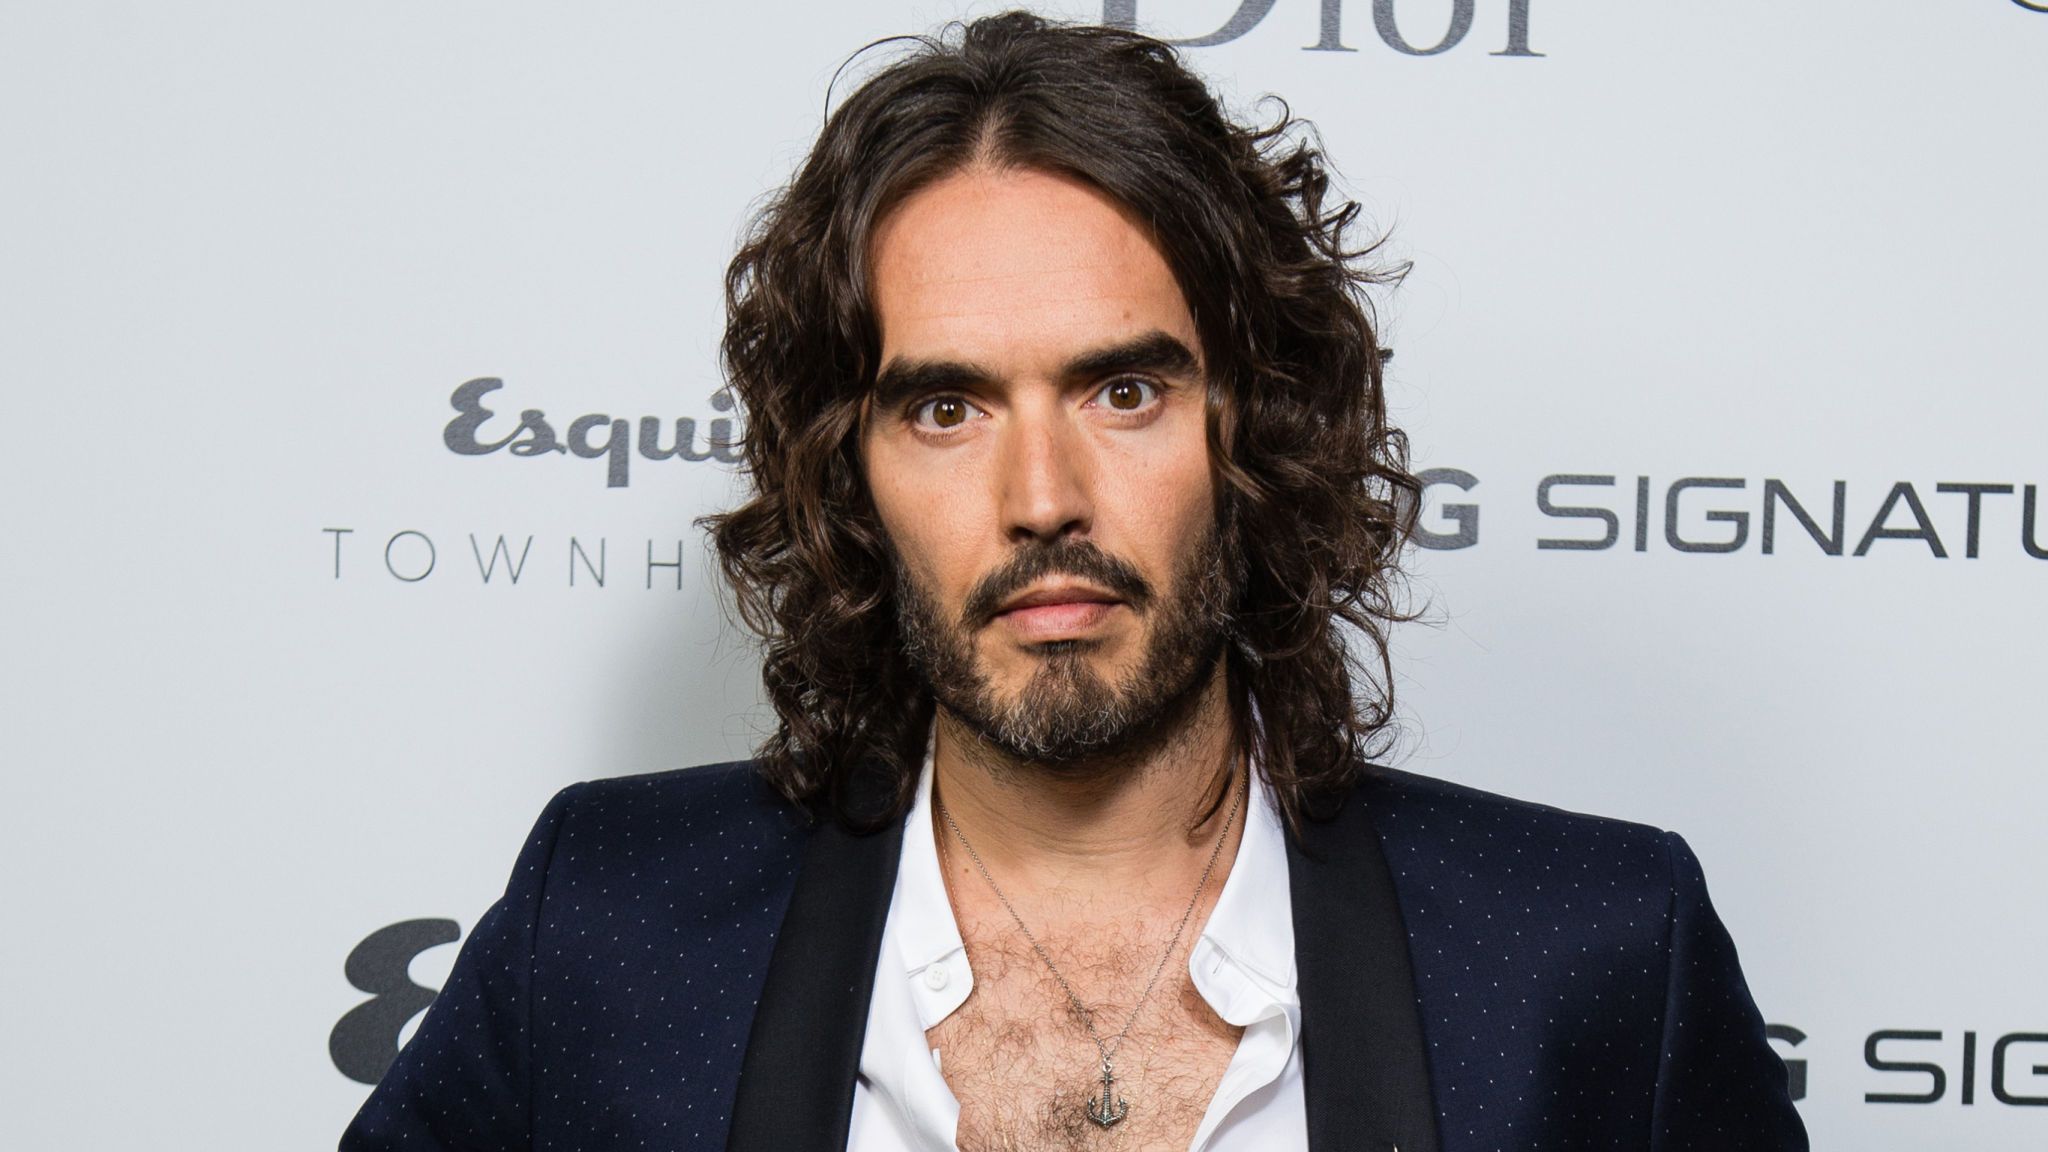 Russell Brand Allegations Prompt U.K. Police To Open Sex Crimes Investigation